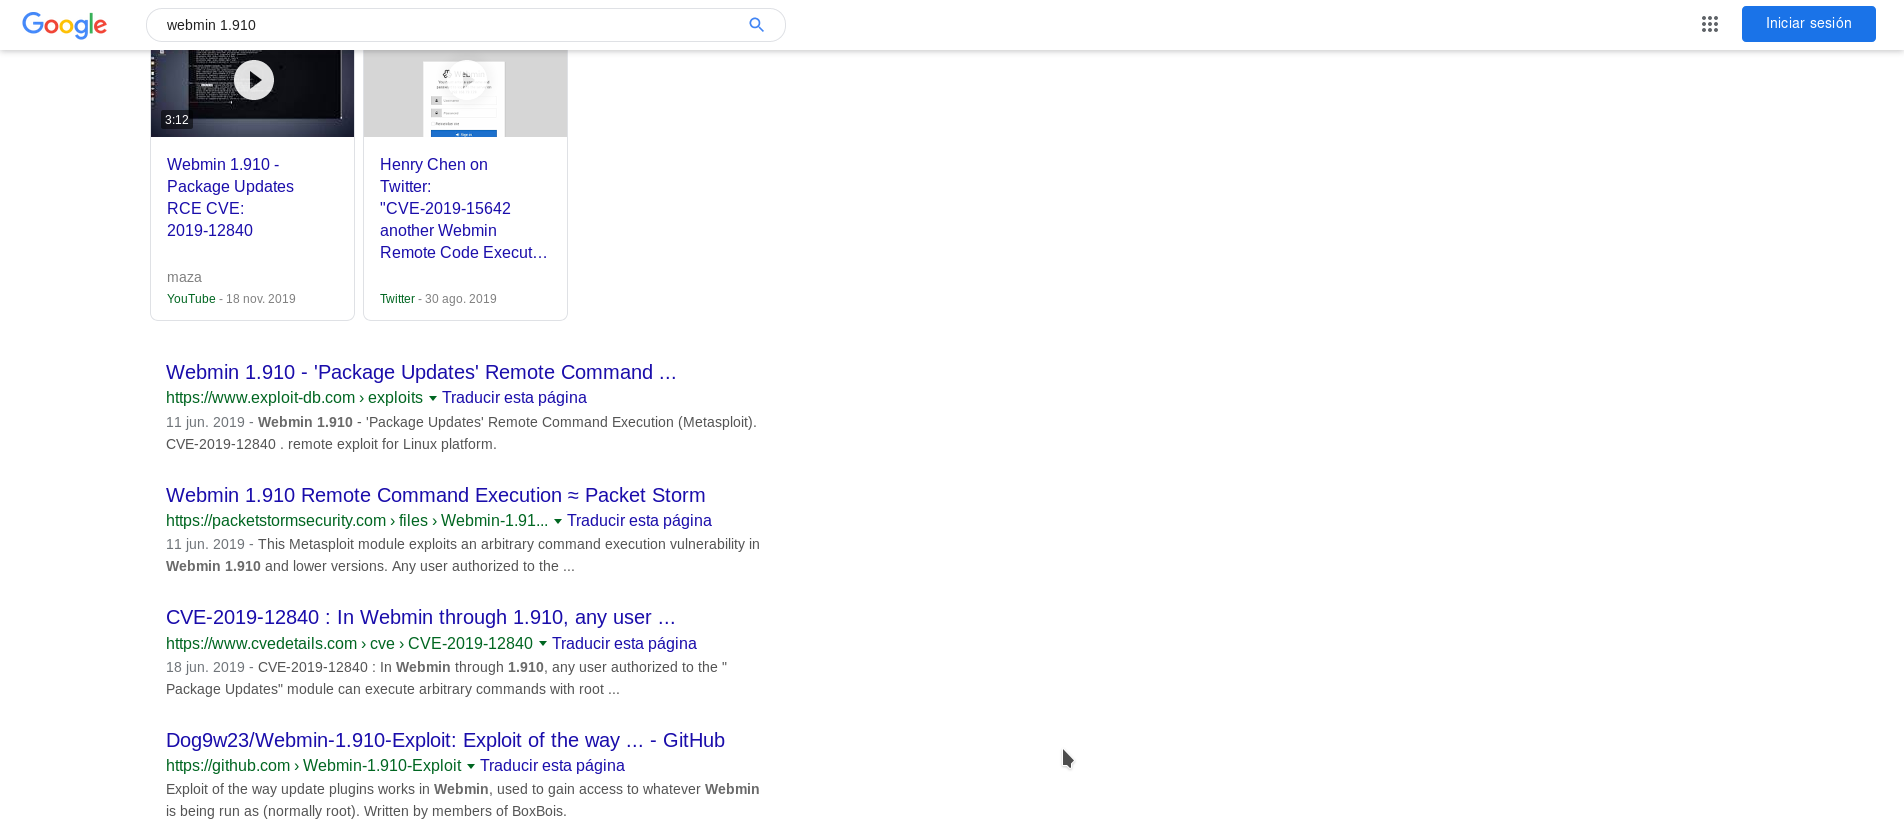 Search results for Webmin 1.910 in Google